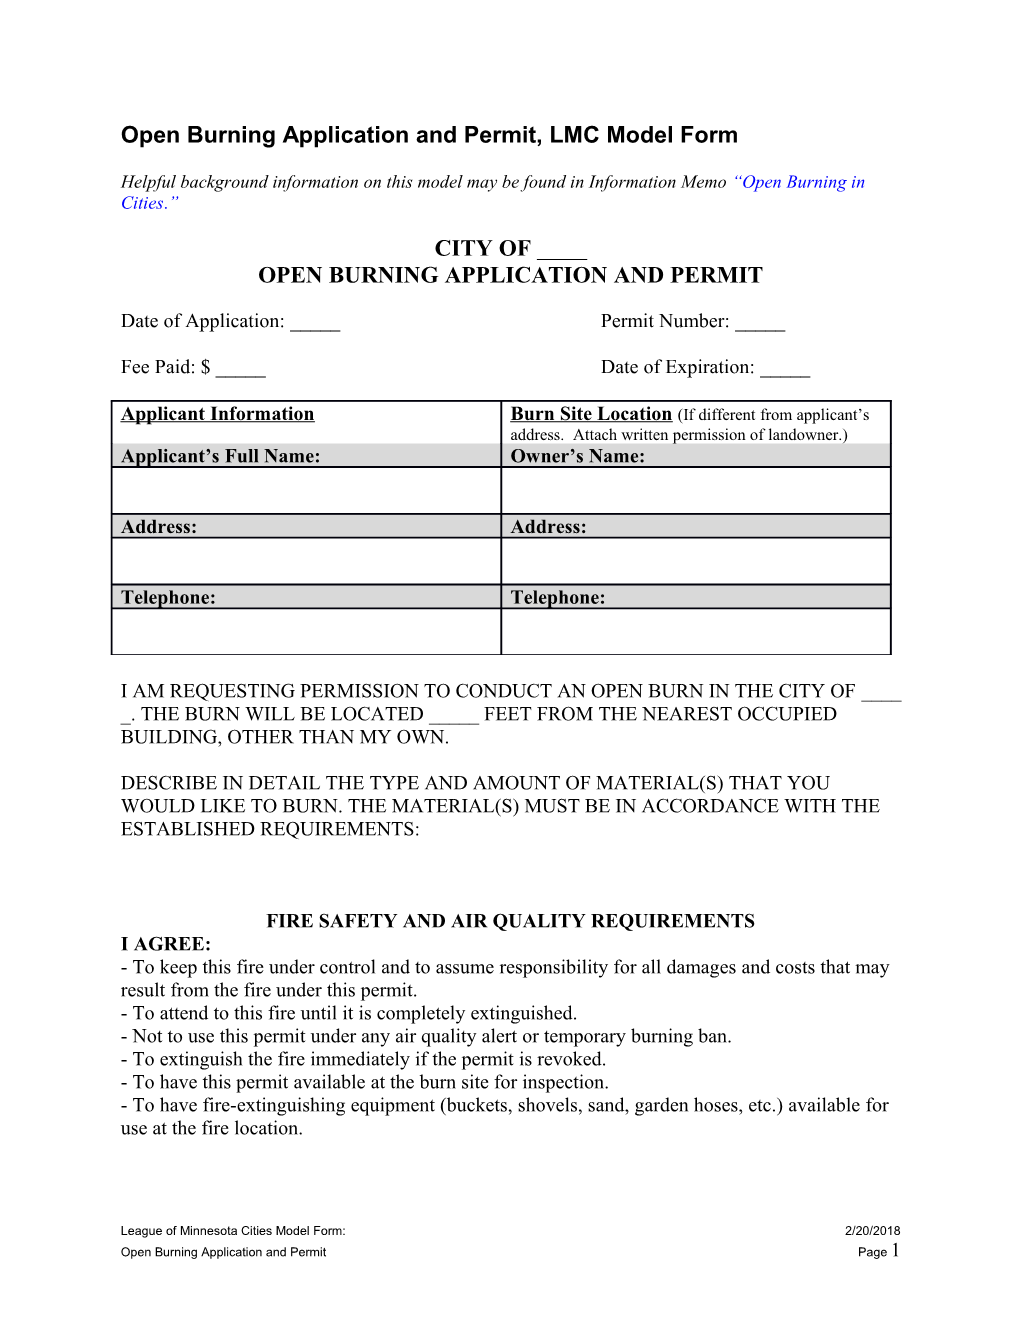 Open Burning Application and Permit